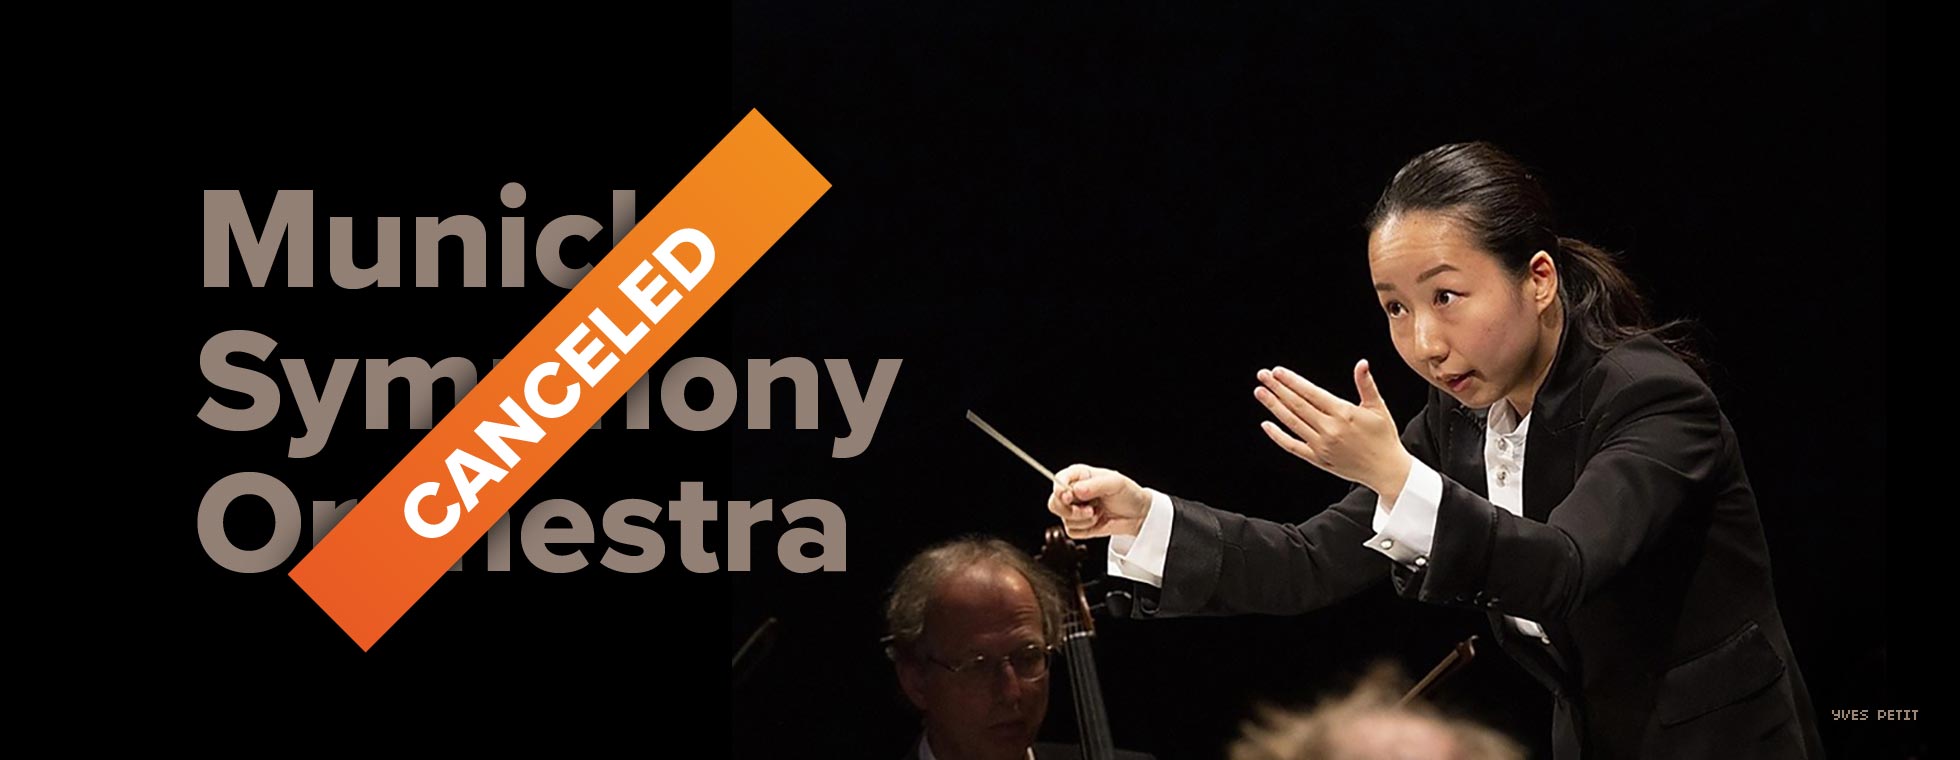 Munich Symphony Orchestra is canceled.